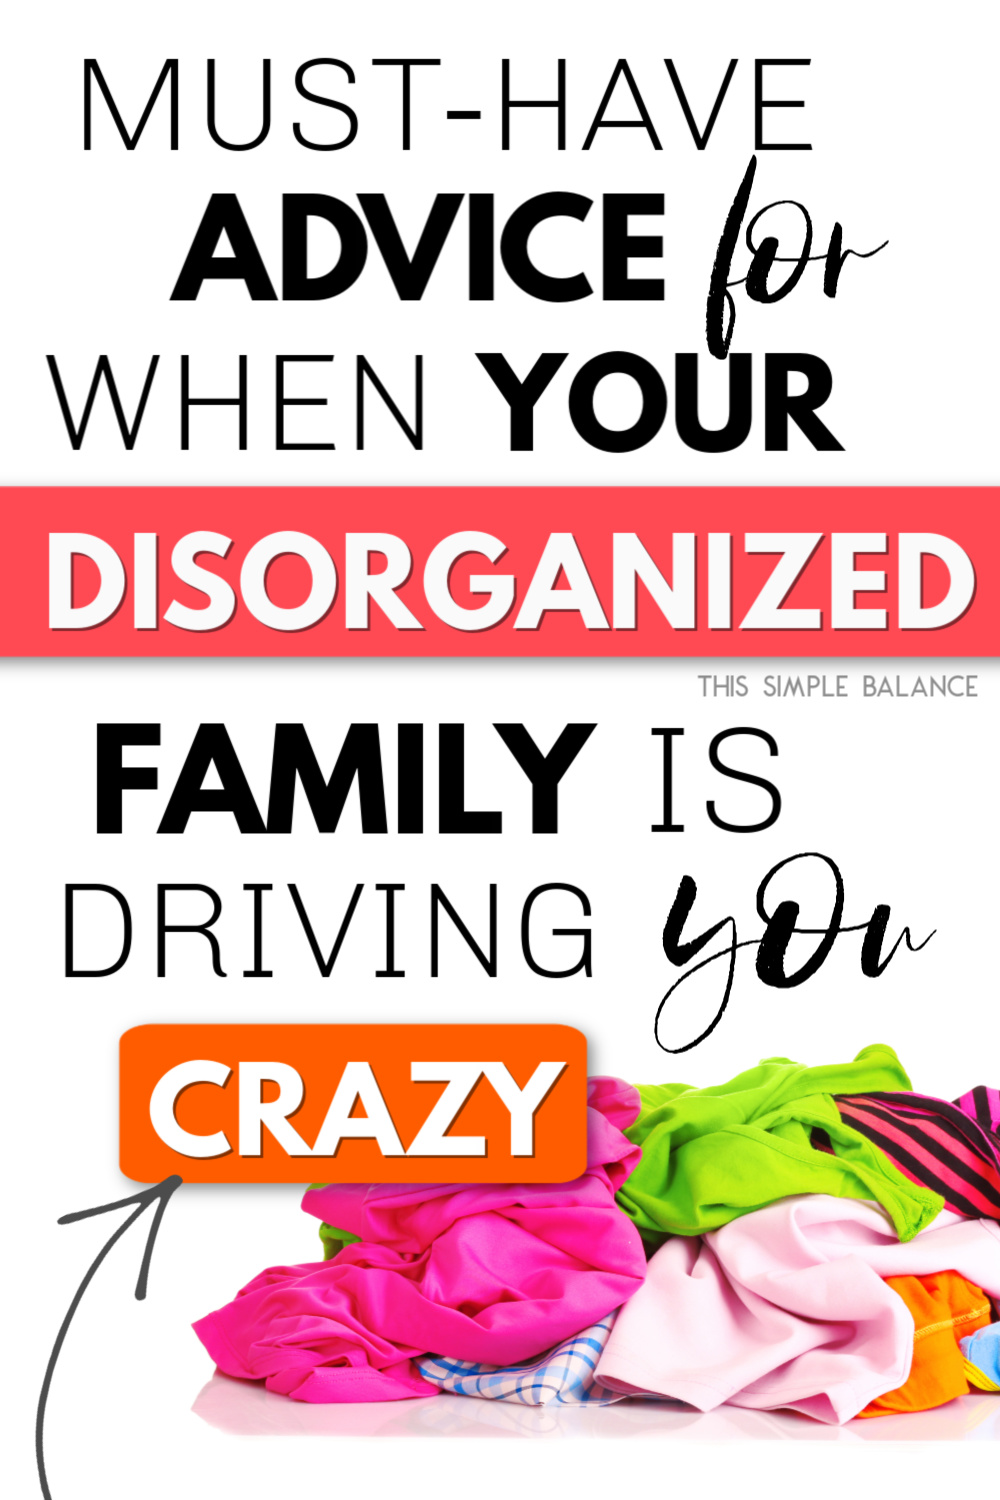 messy pile of clothes on white with text overly "must have advice for when your disorganized family is driving you crazy"